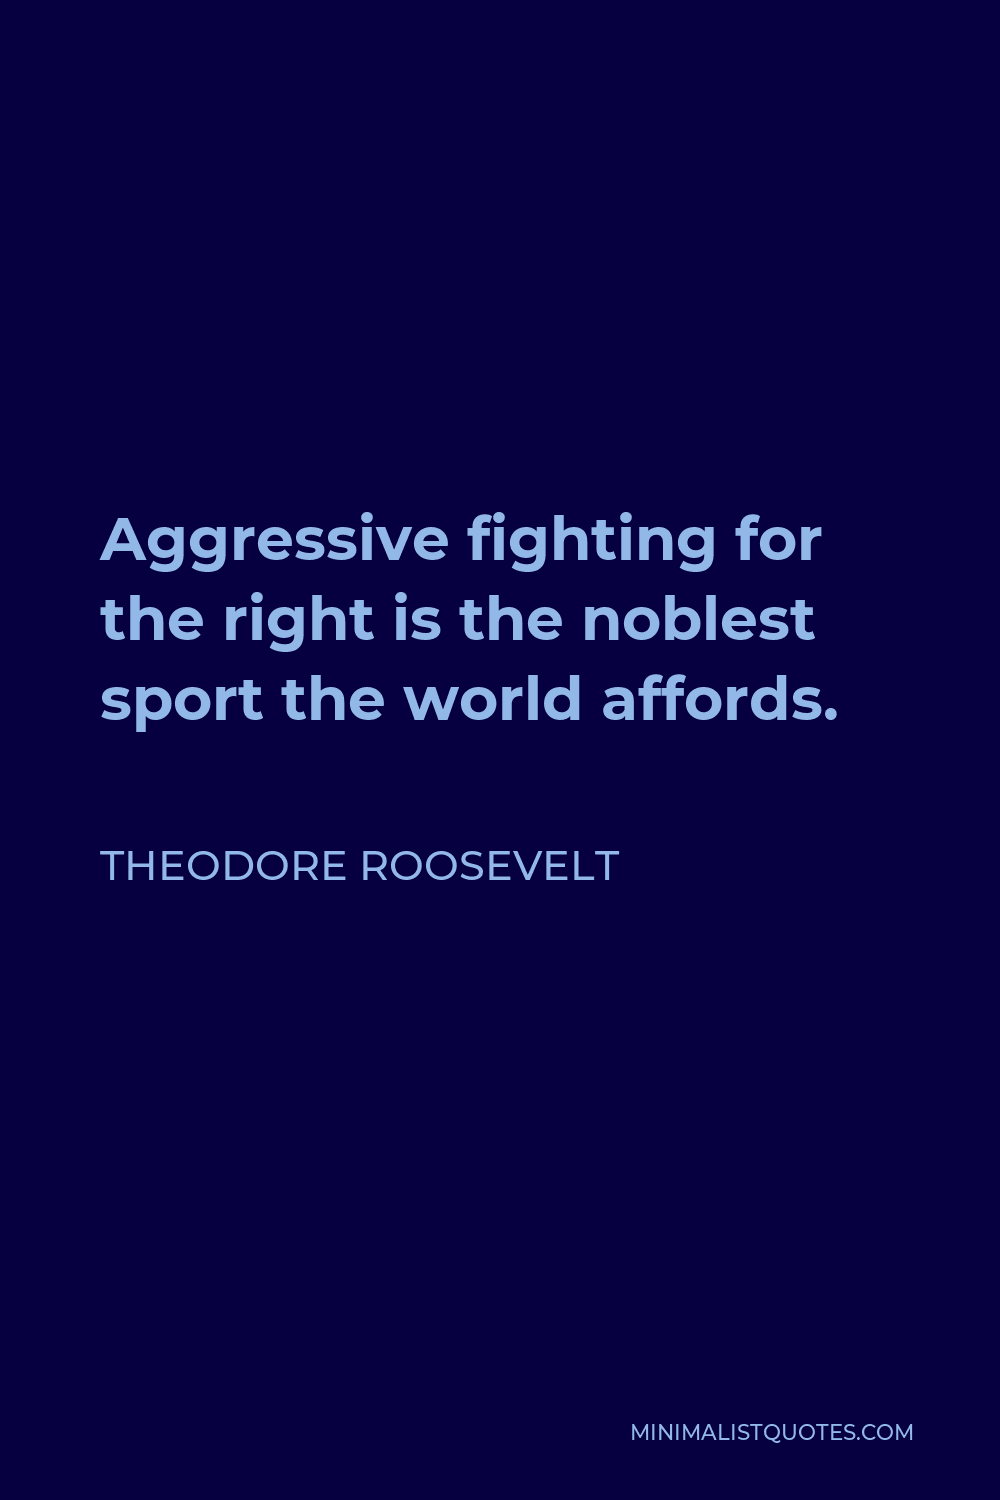 Theodore Roosevelt Quote - Aggressive fighting for the right is the noblest sport the world affords.